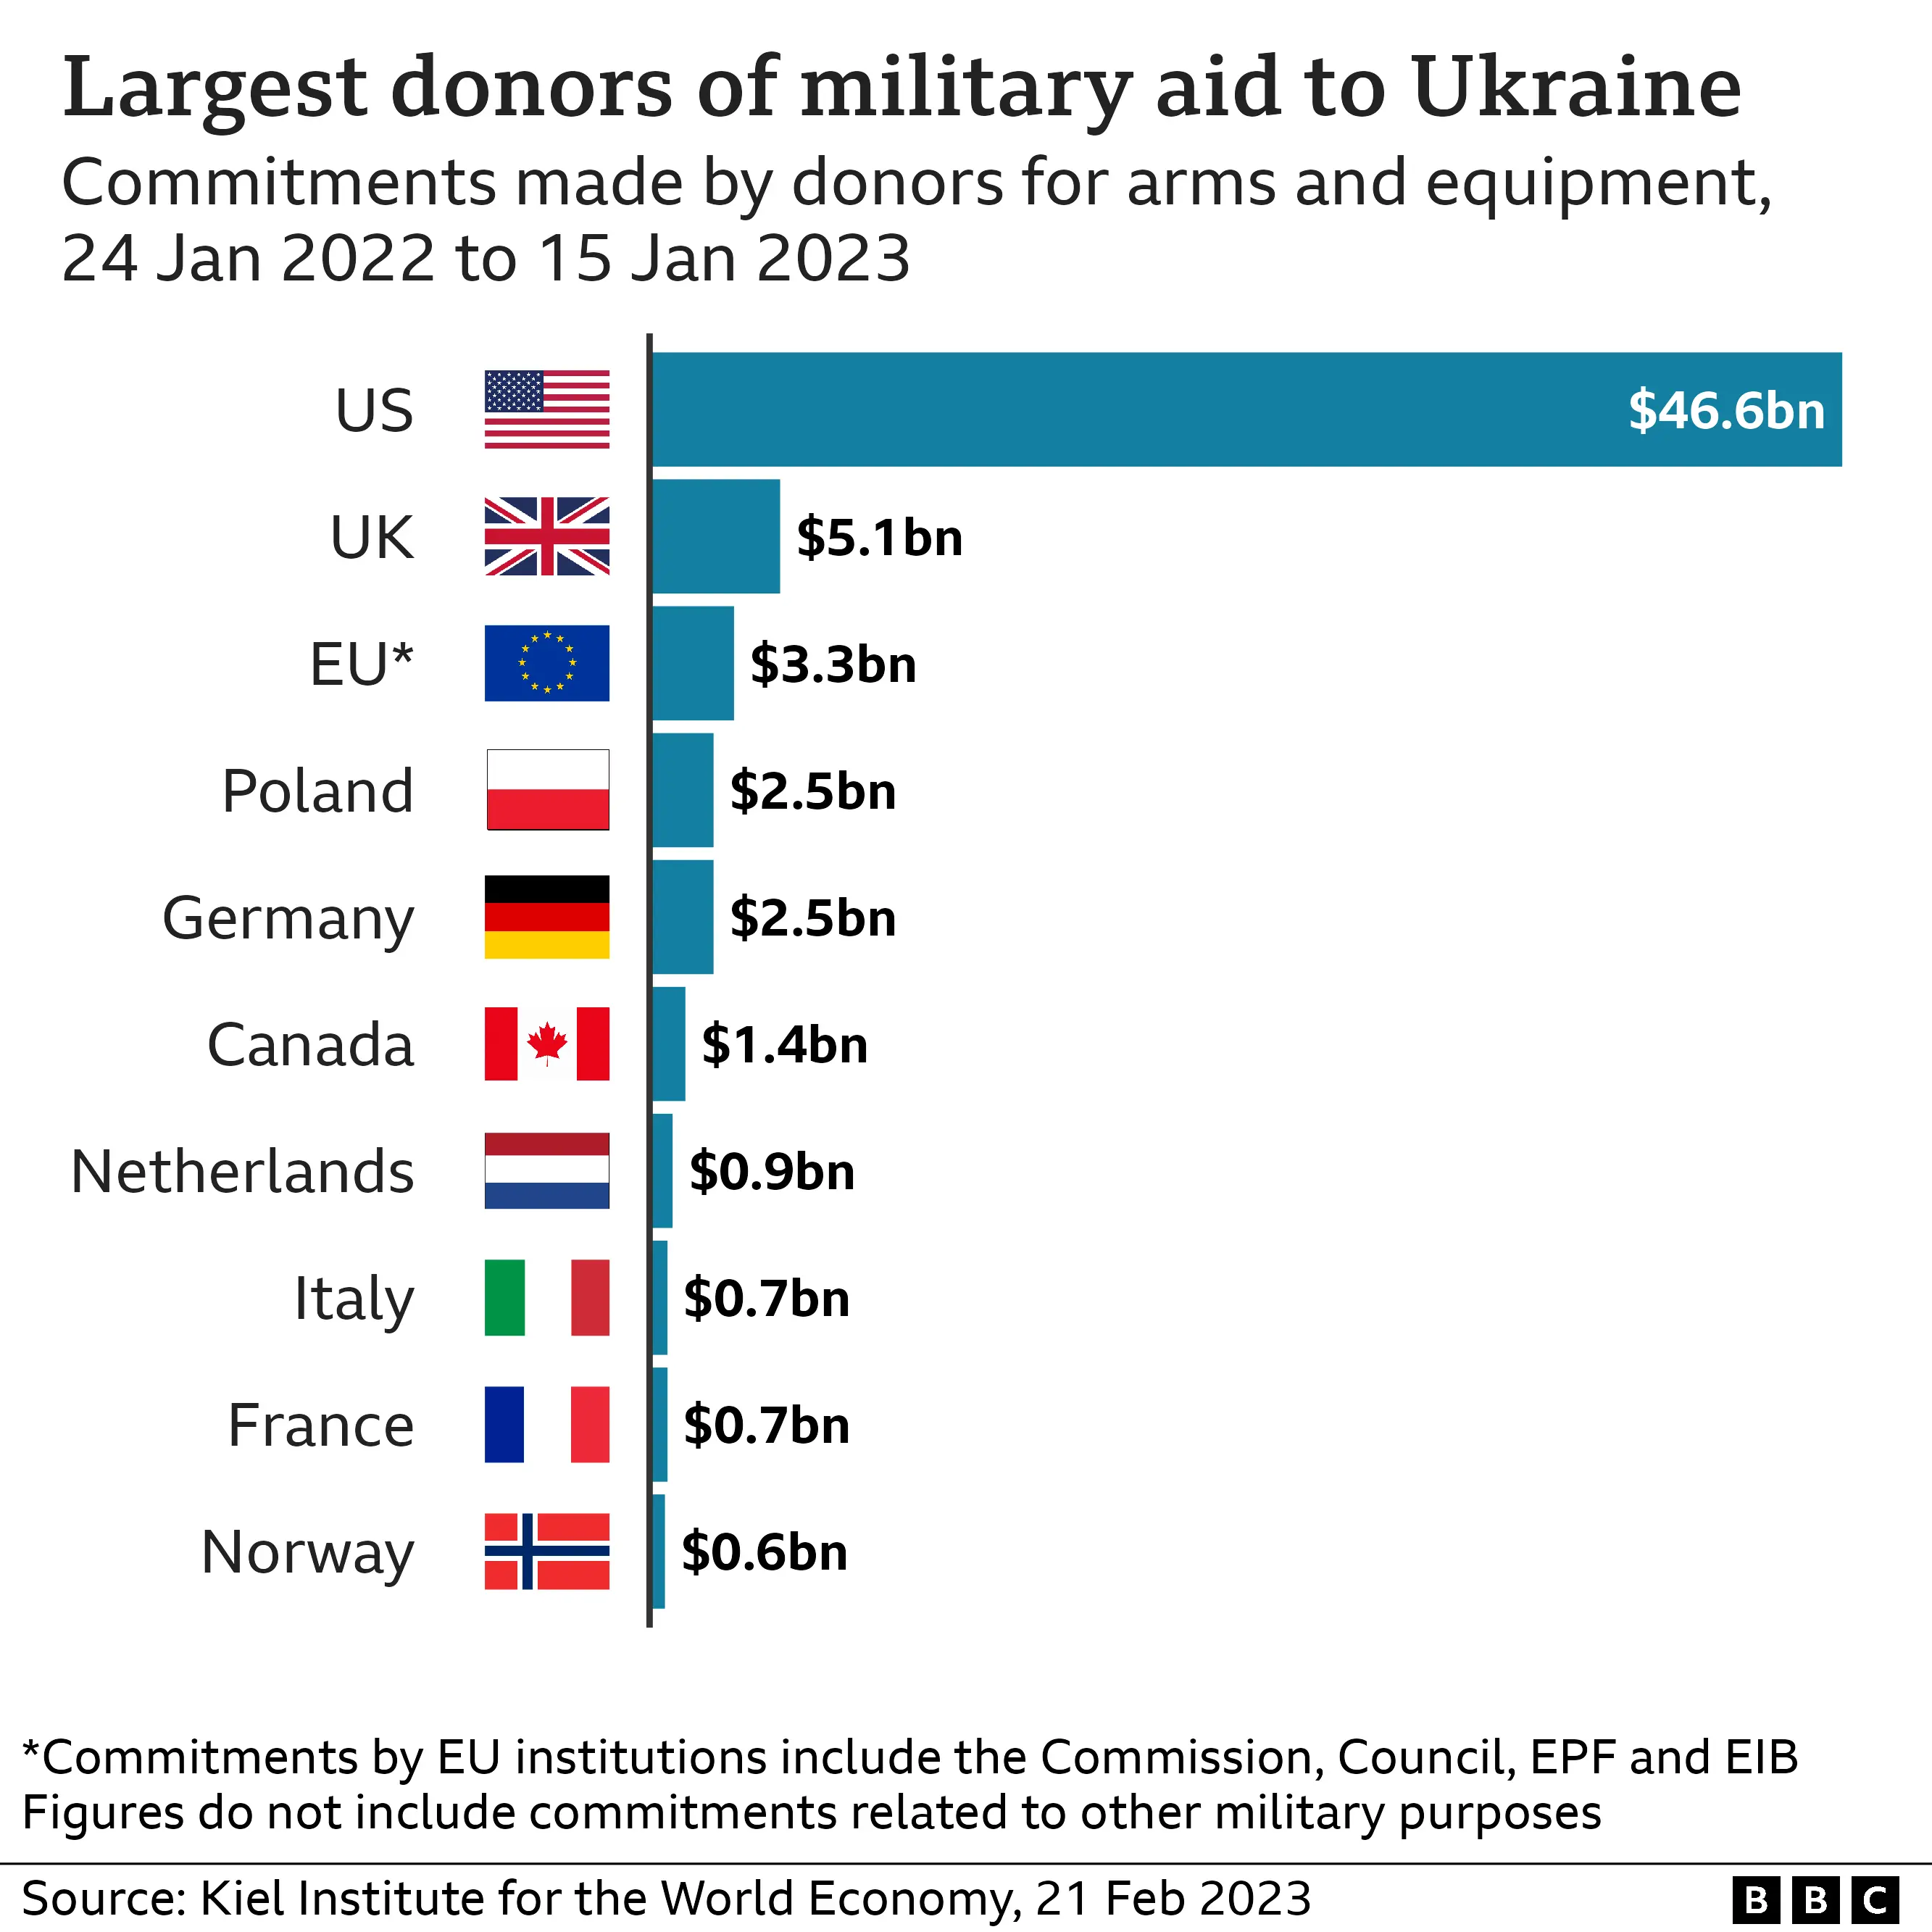 How much money has the US given to Ukraine?